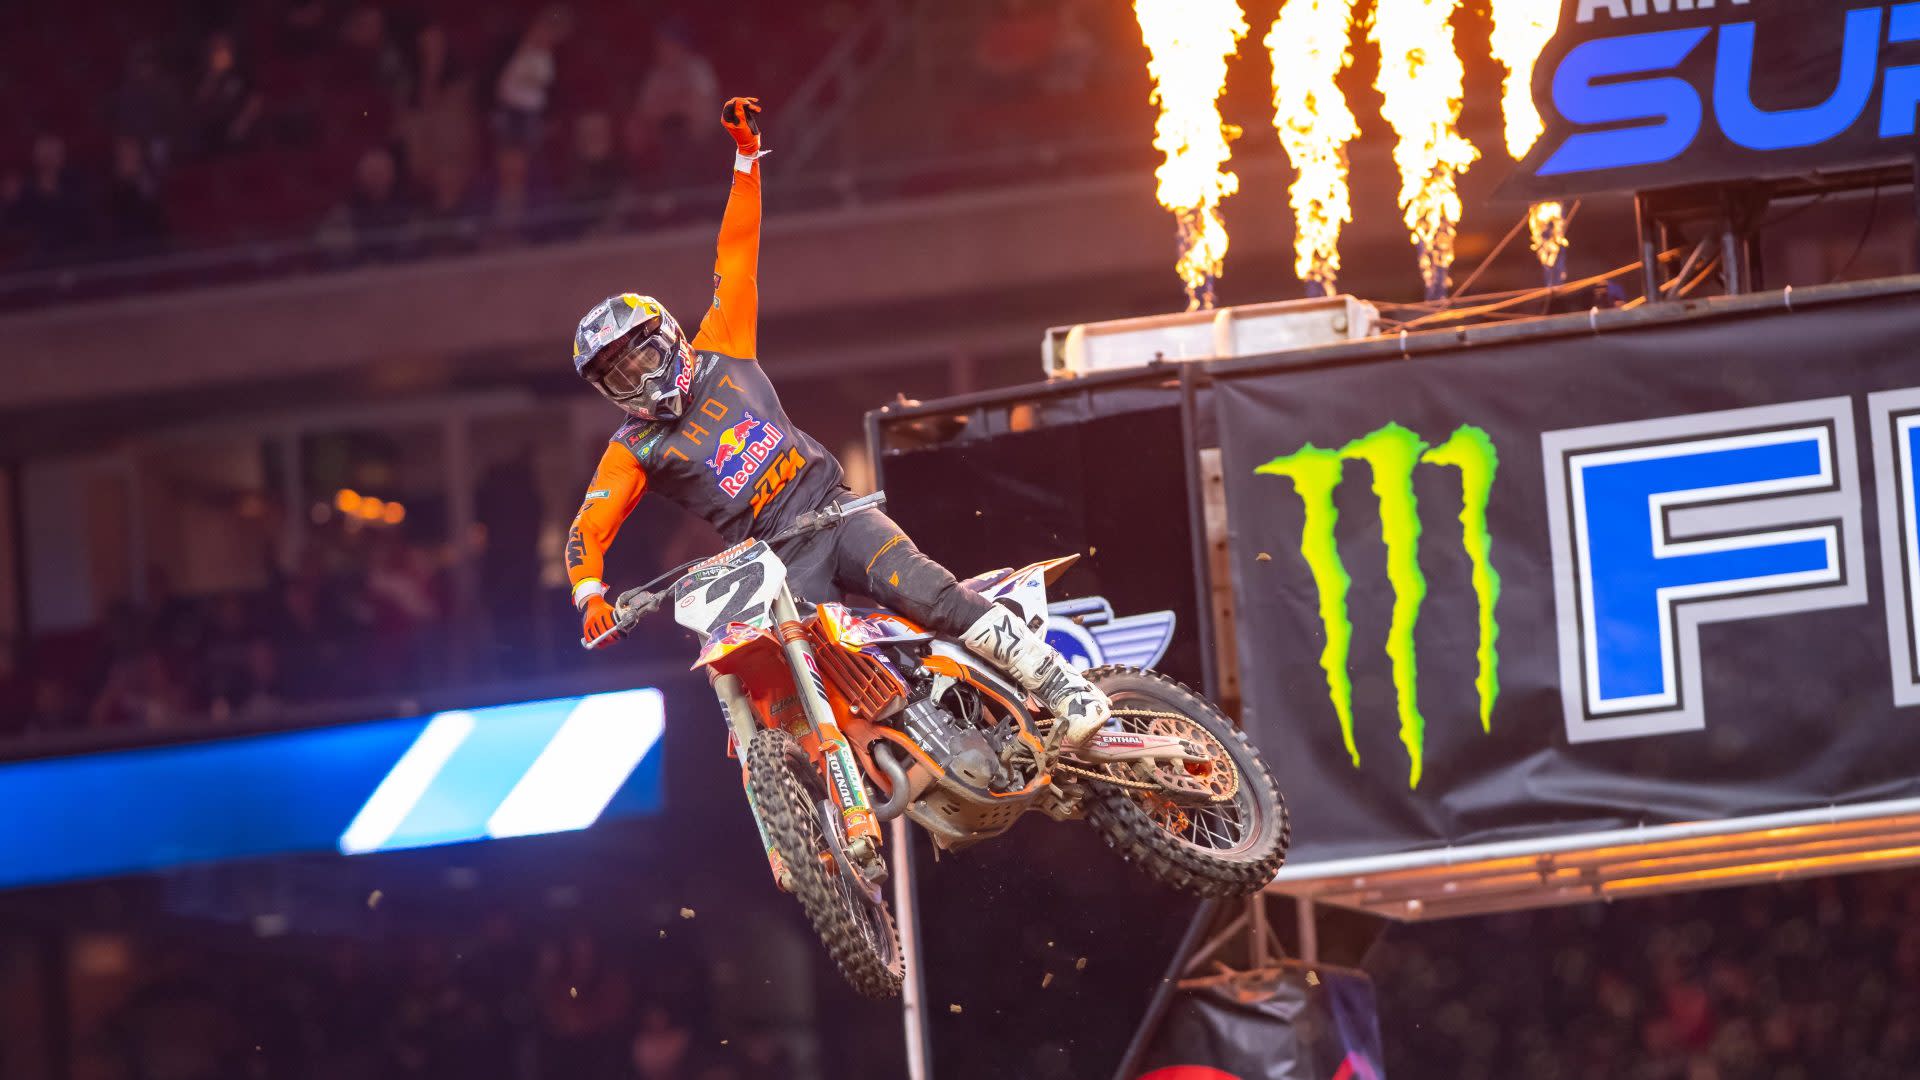 Saturday S Supercross Round 4 In Indy How To Watch Start Times Schedule Tv Info